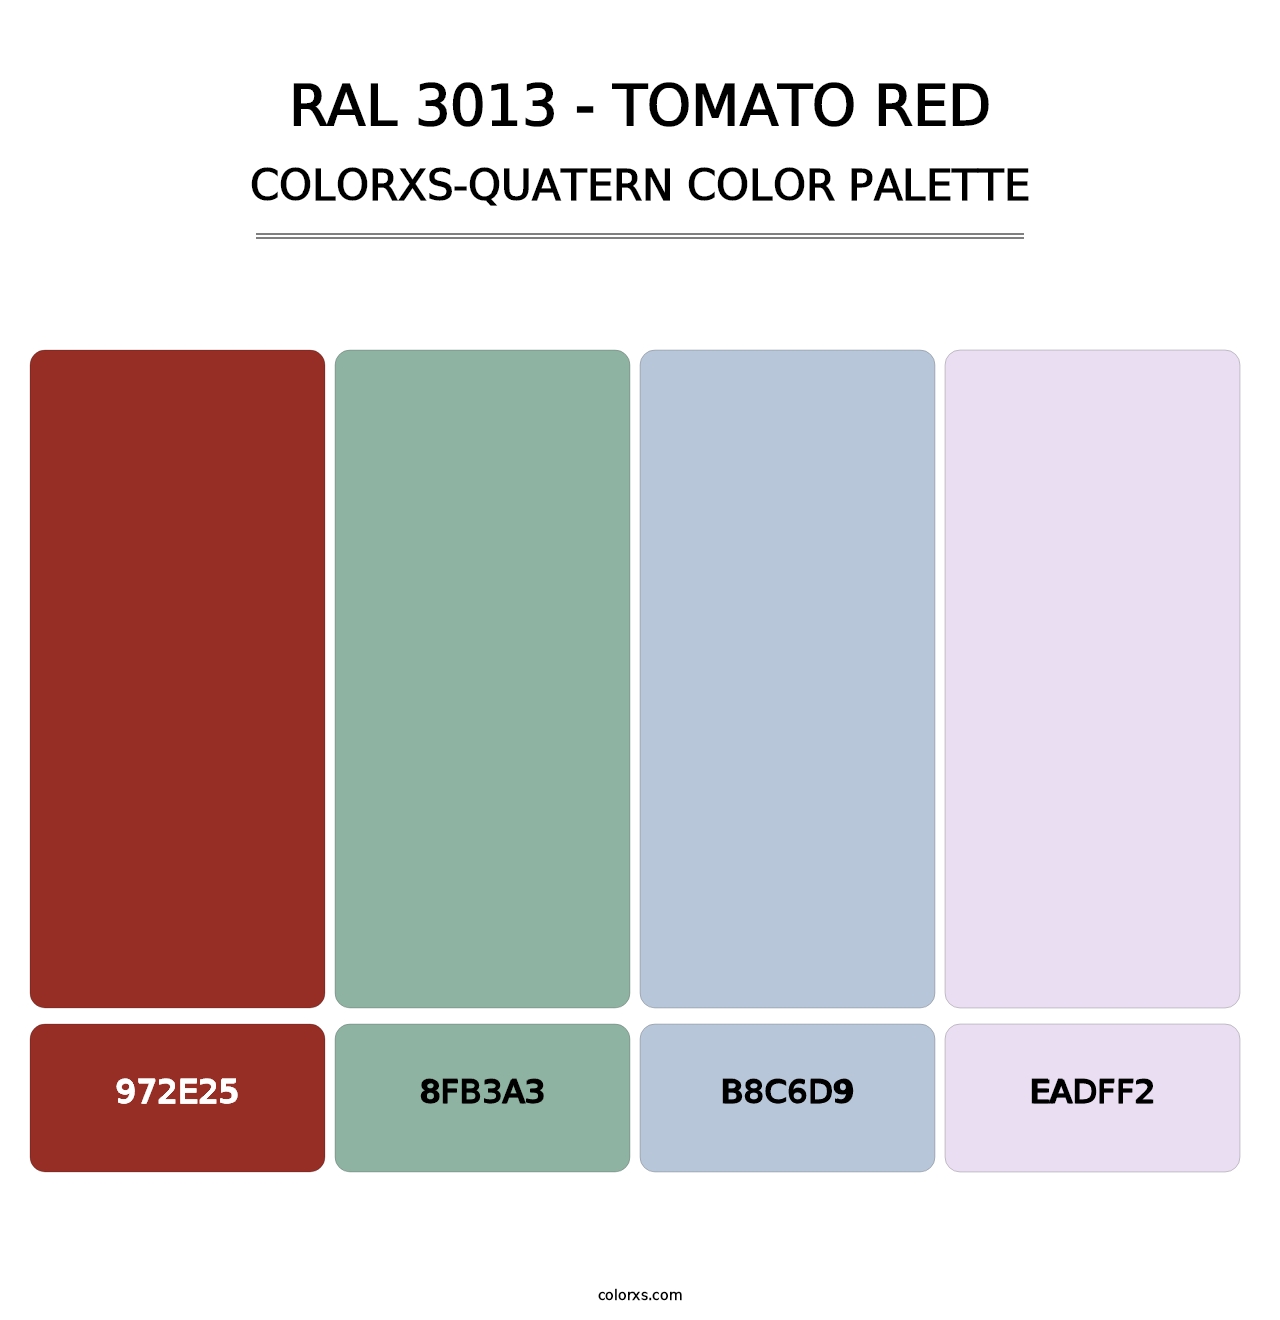 RAL 3013 - Tomato Red - Colorxs Quatern Palette